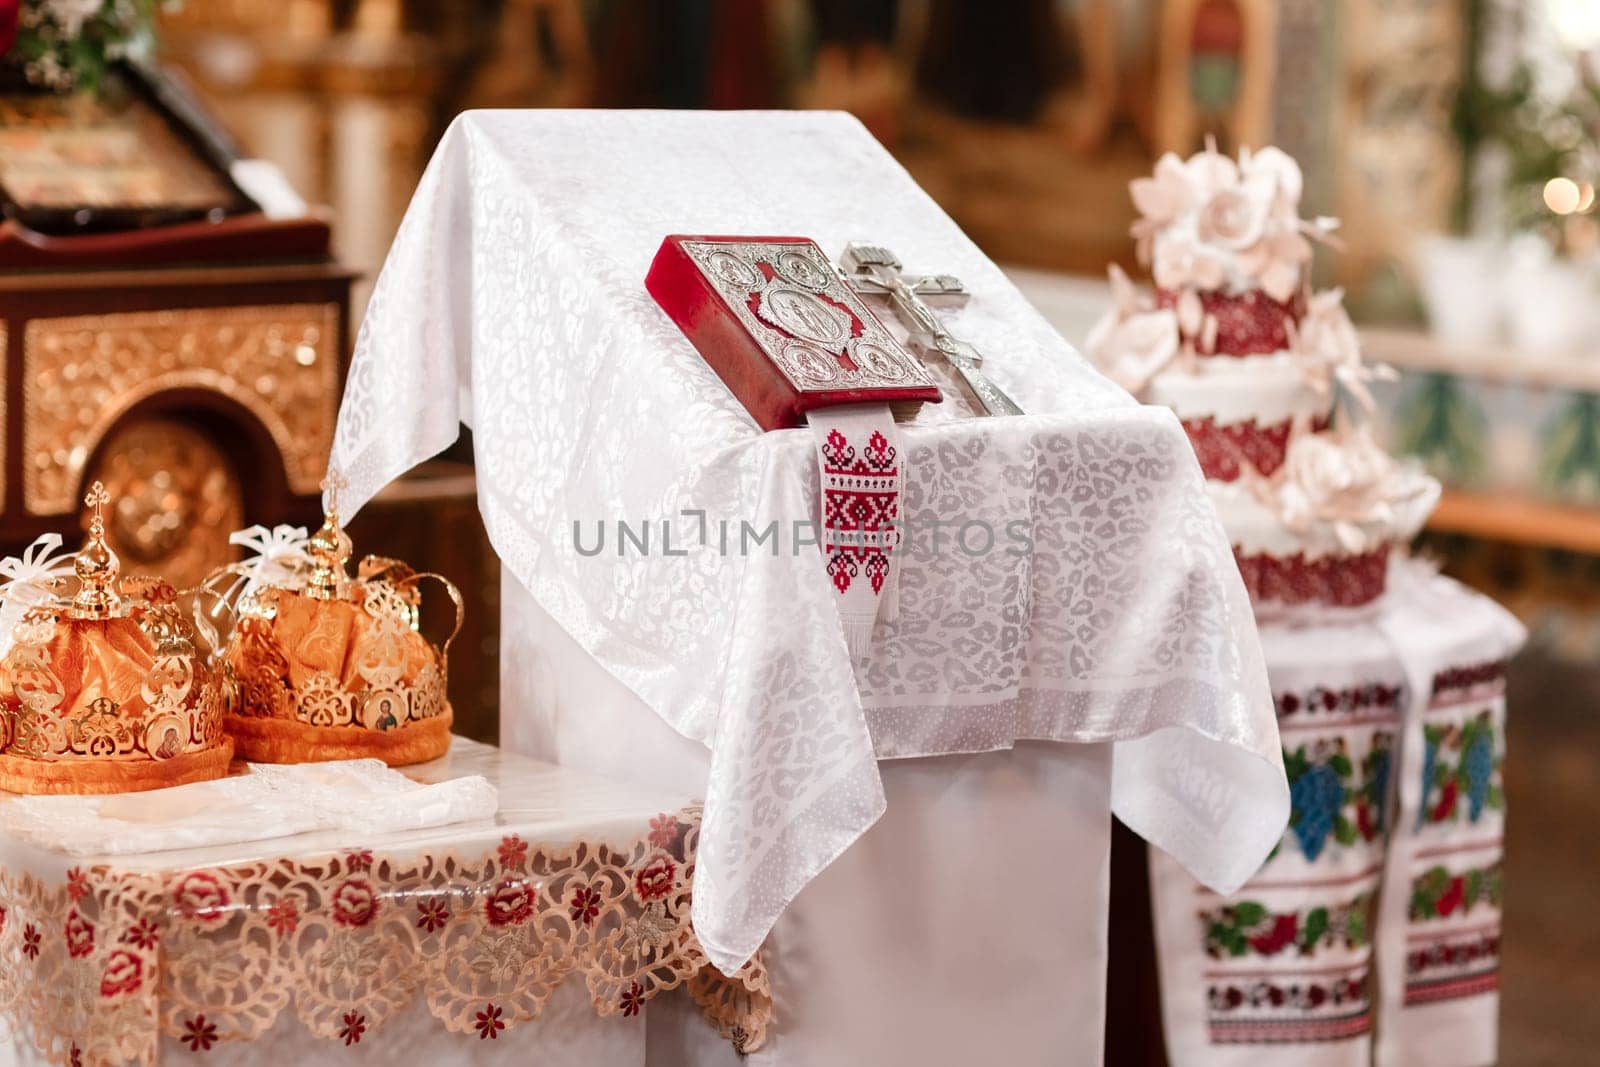 Two crowns the weddings intended for ceremony in orthodox church. Orthodox wedding accessories Holy Bible and silver cross.